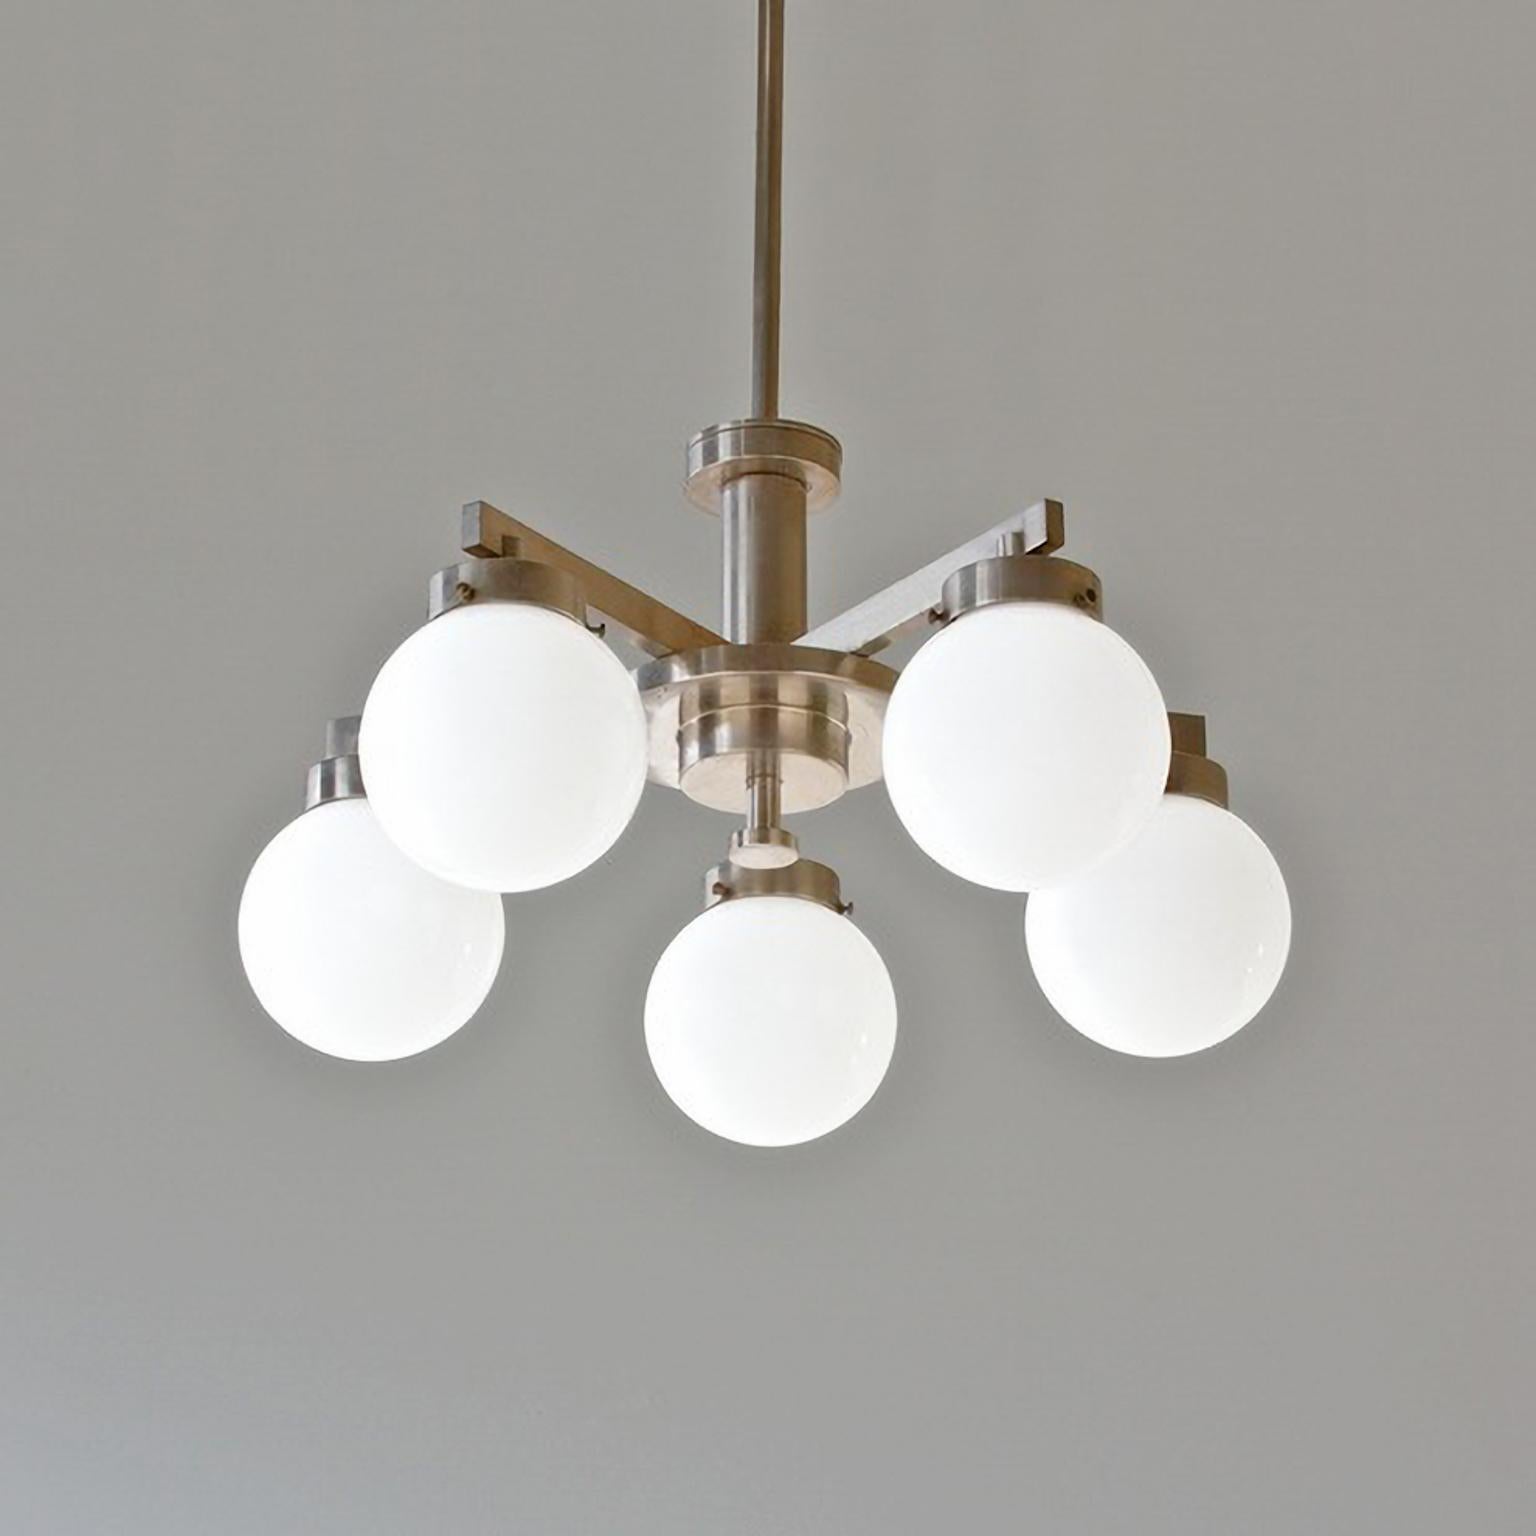 Mid-20th Century Modernist Pendant Light Nickel Plated Brass with 5 Opaline Glass Bulbs circa1930 For Sale